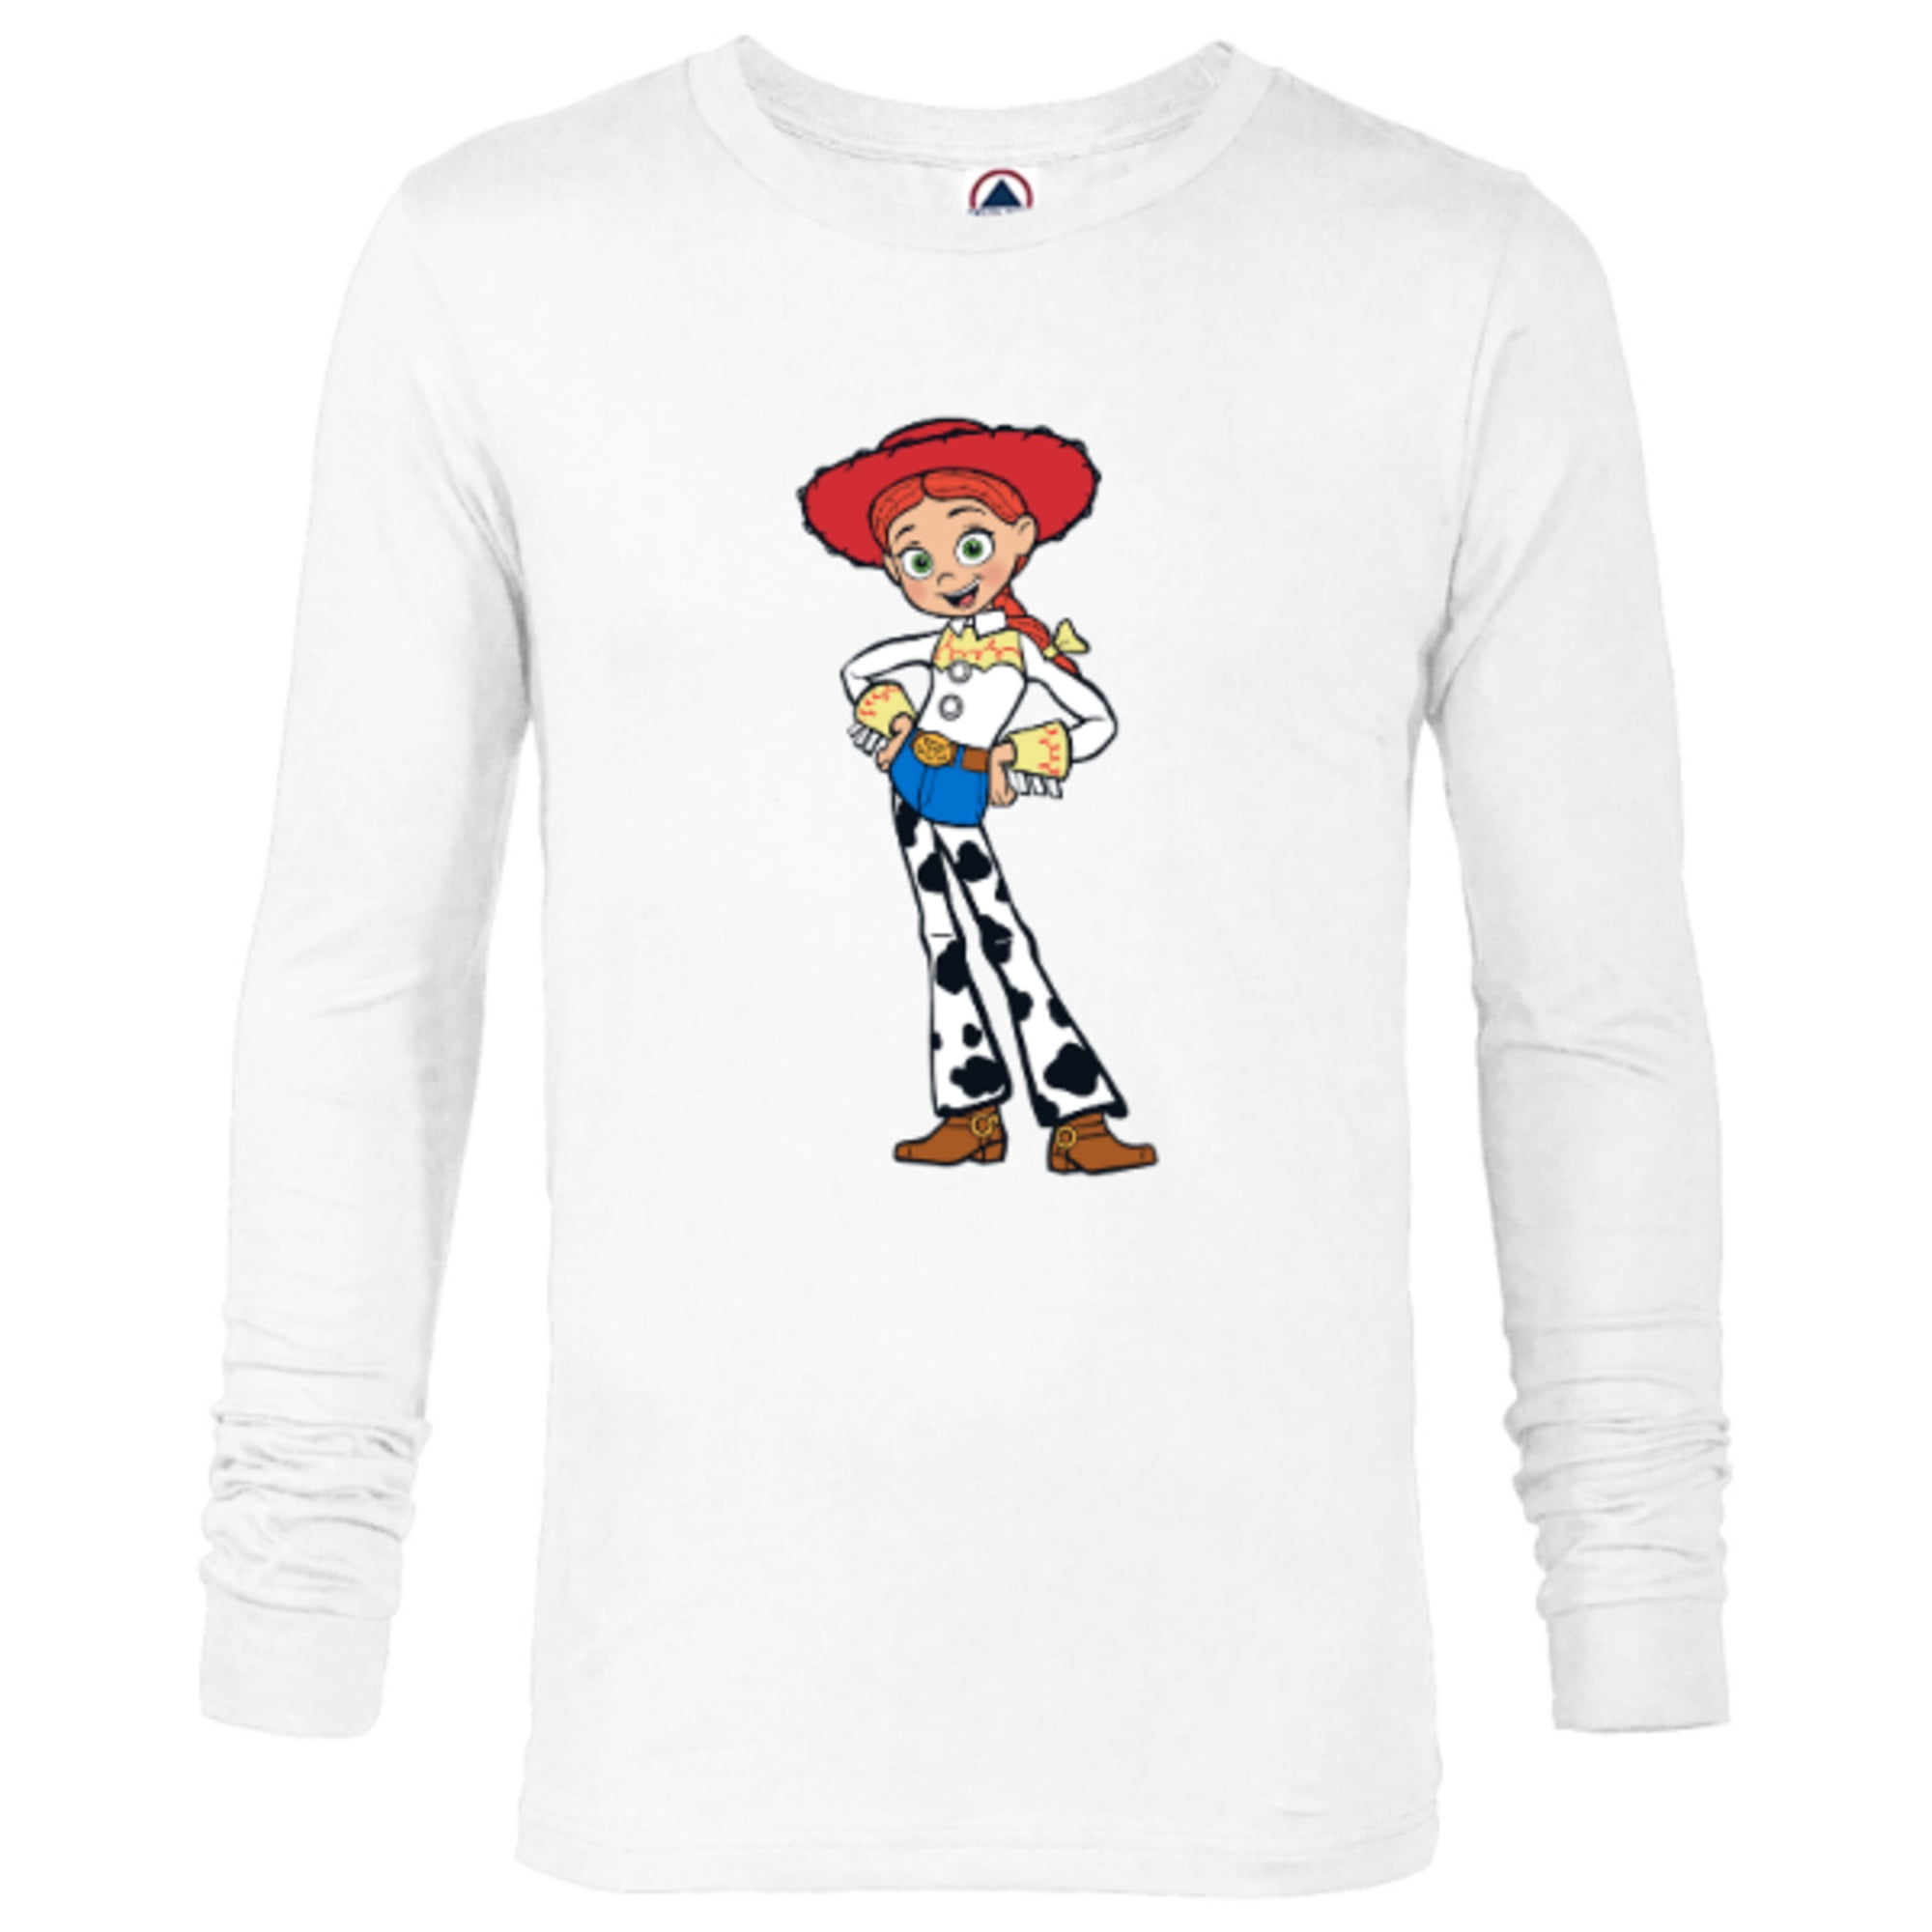 Disney Pixar Toy Story 4 Cowgirl Jessie T-Shirt - Long Sleeve T-Shirt for  Men - Customized-White